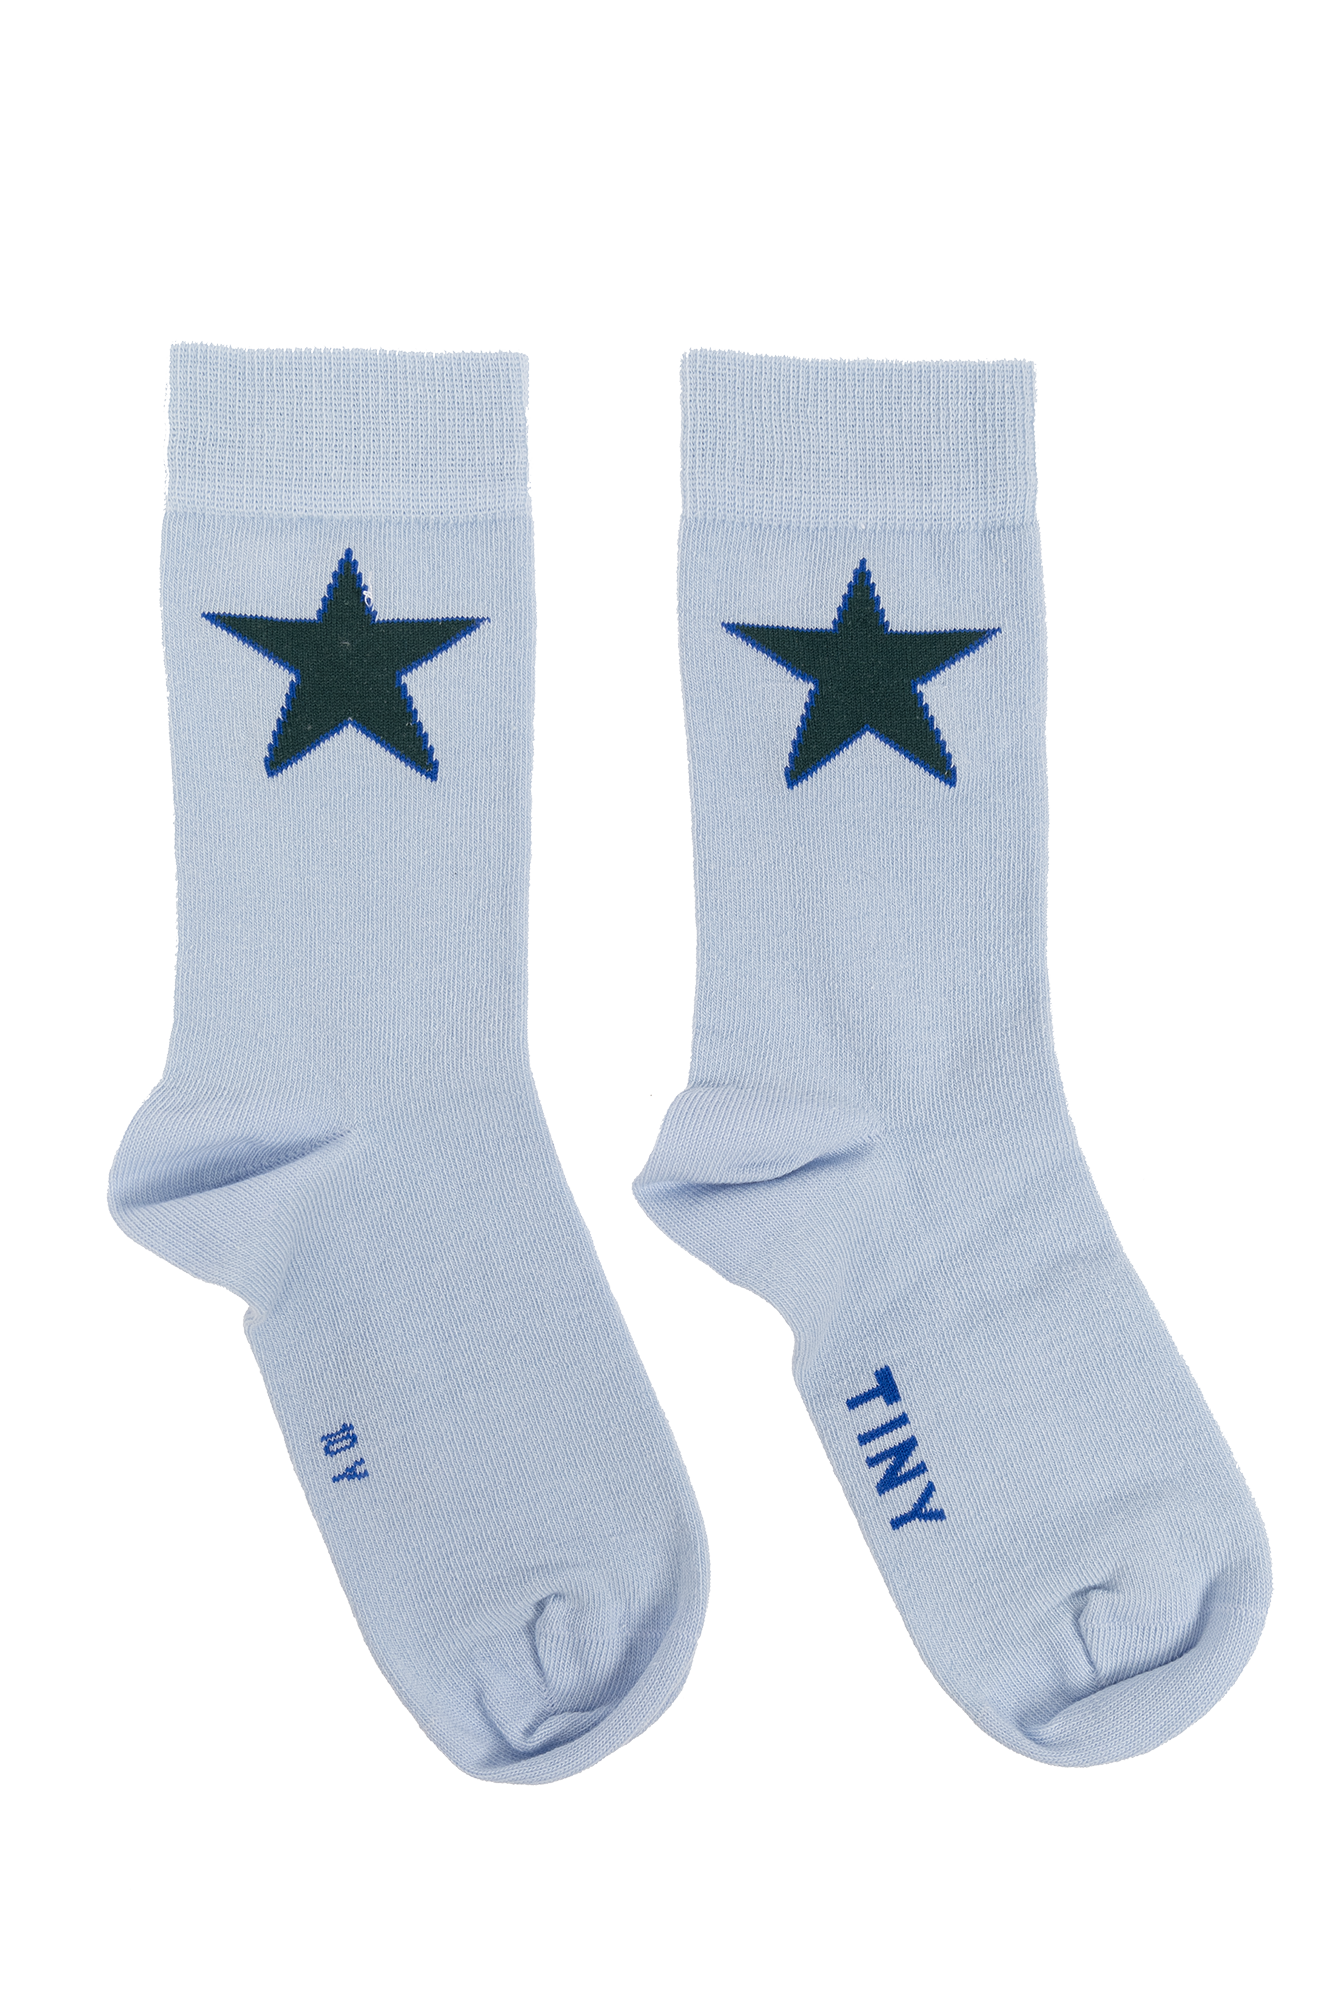 Tiny Cottons Socks with star motif